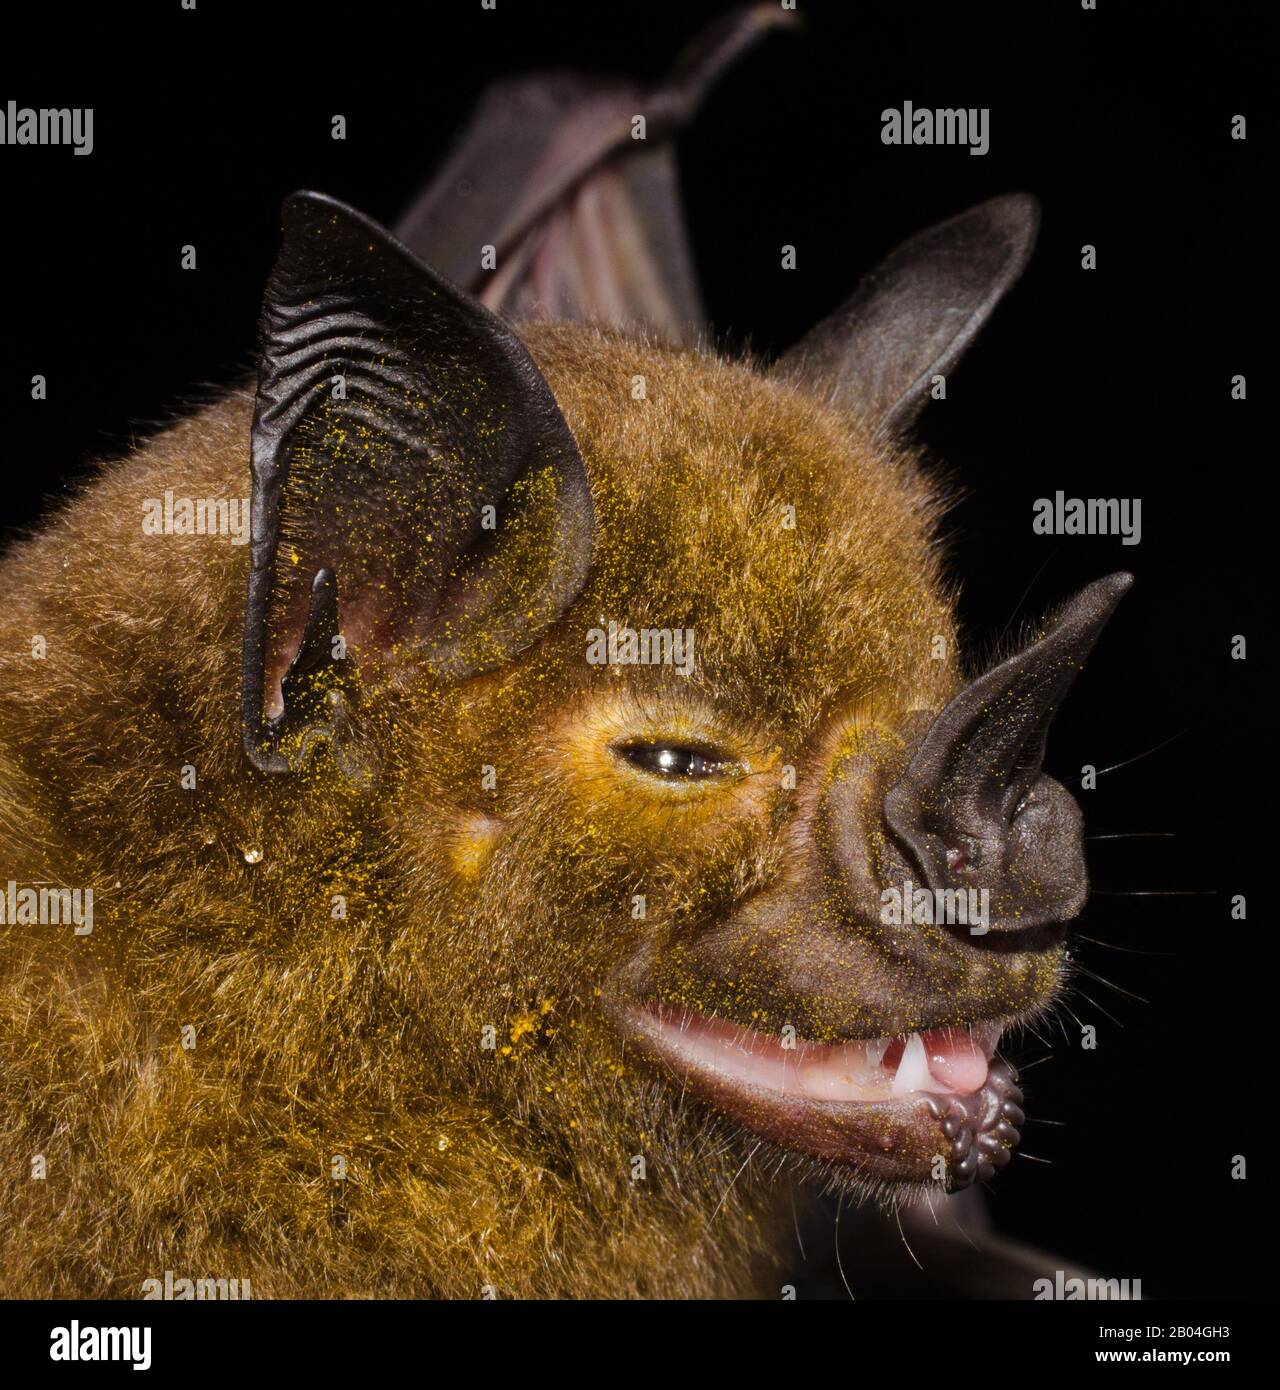 The greater spear-nosed bat (Phyllostomus hastatus) is a bat species of the family Phyllostomidae from South and Central America Stock Photo